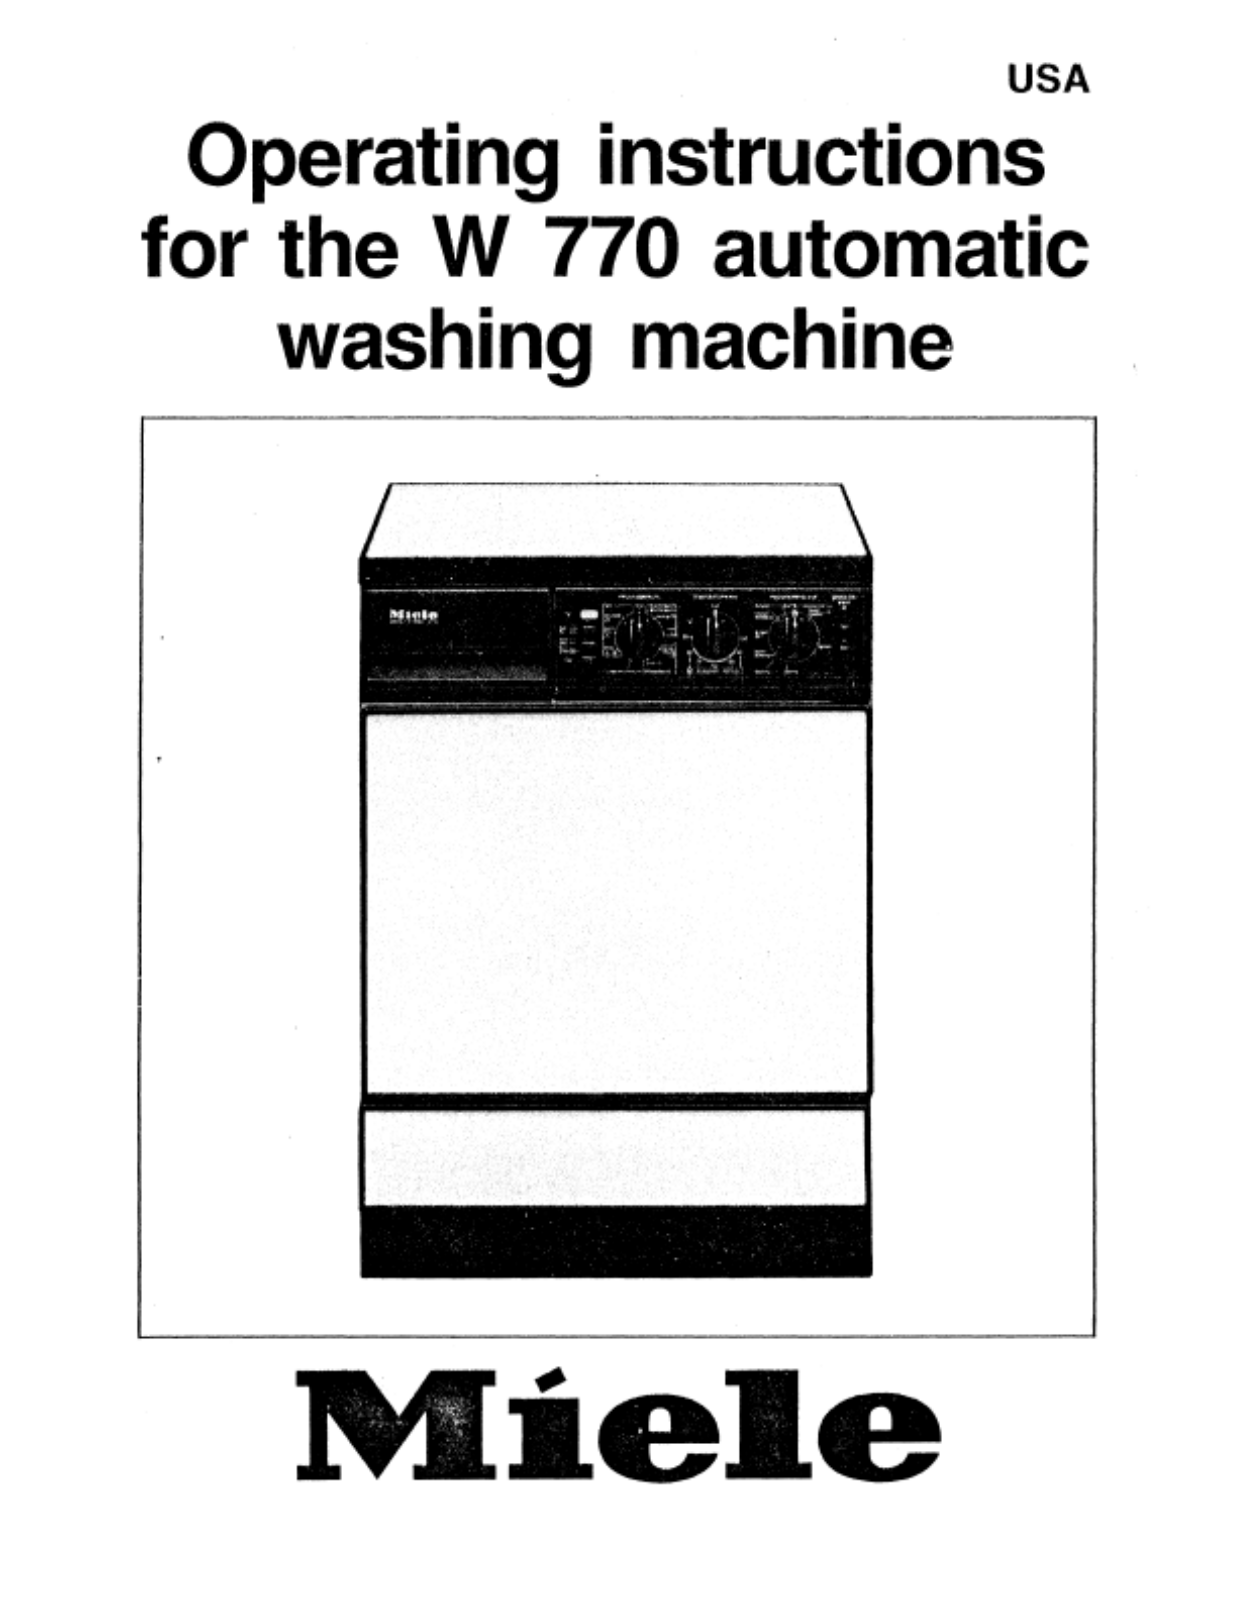 Miele W770 Operating instructions